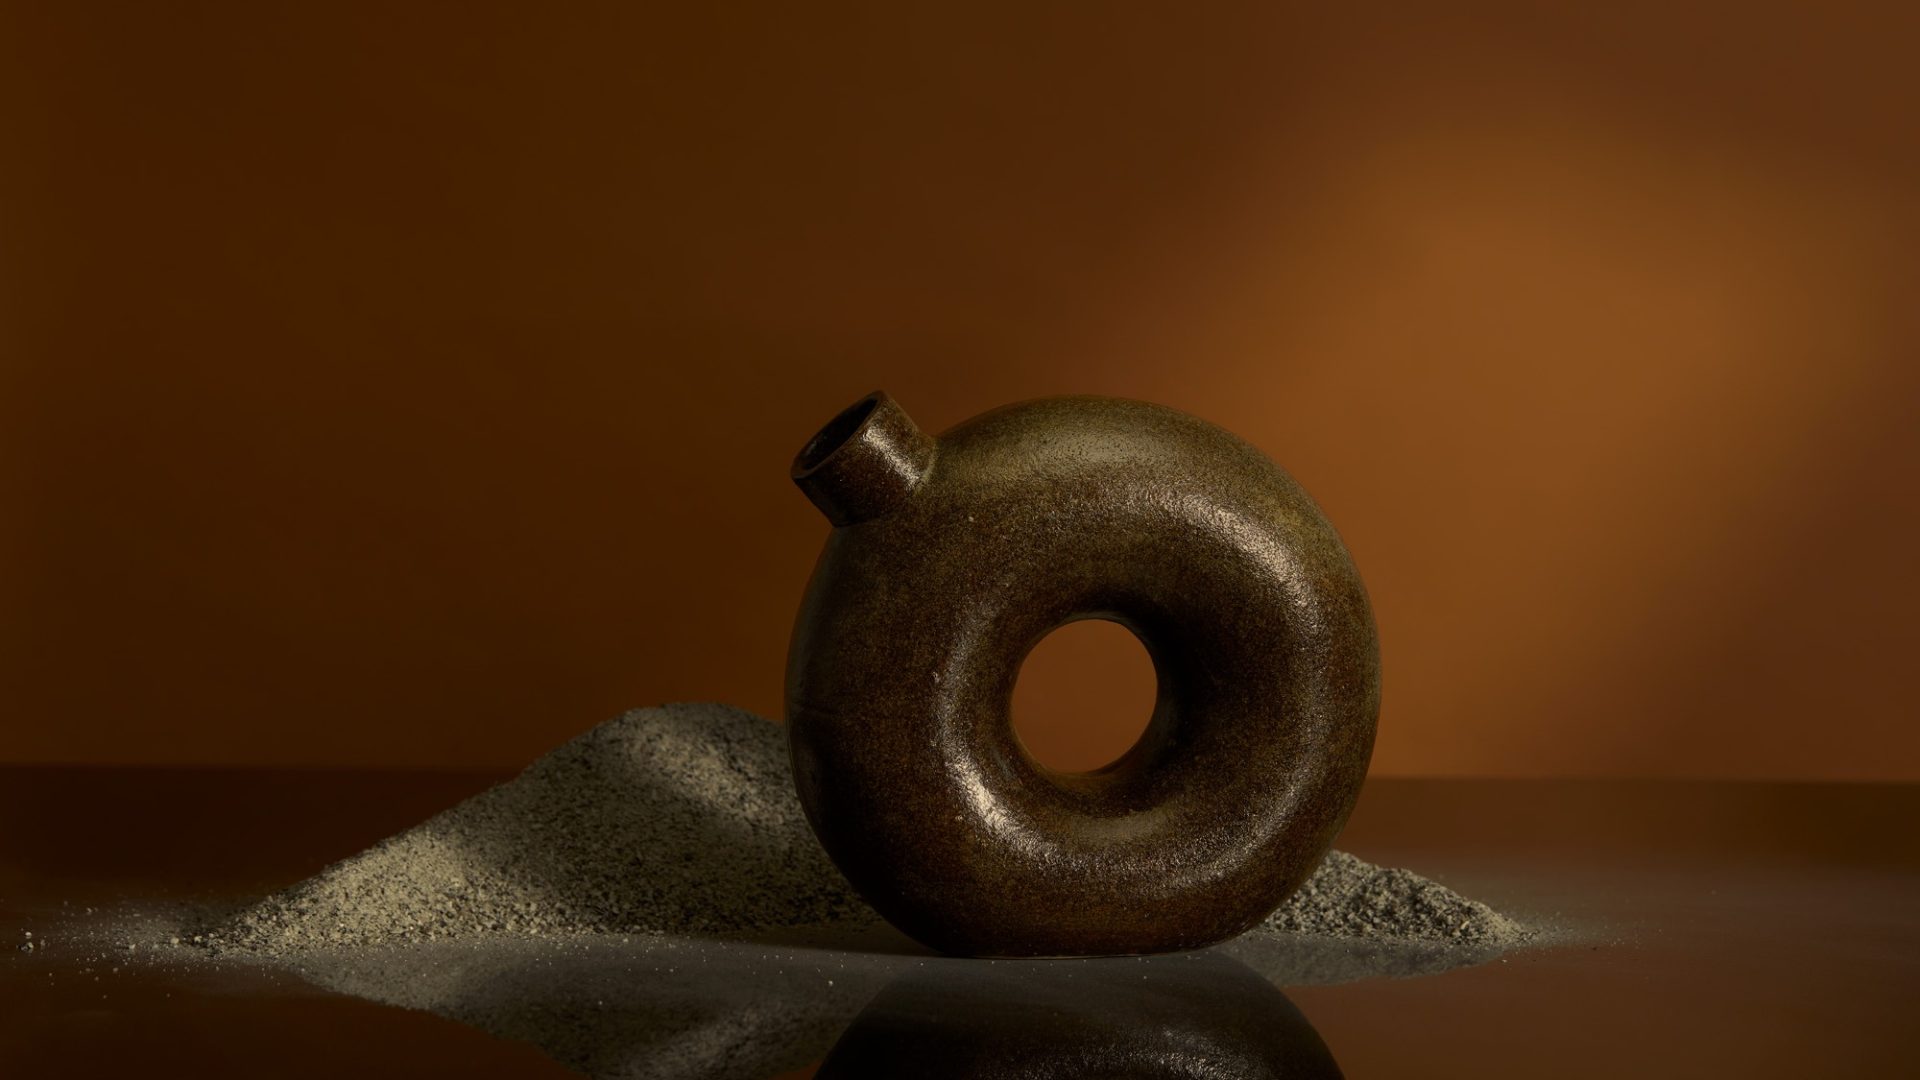 Ring shaped ceramic decanter with a brown textured glaze in front of a pile of granite sand